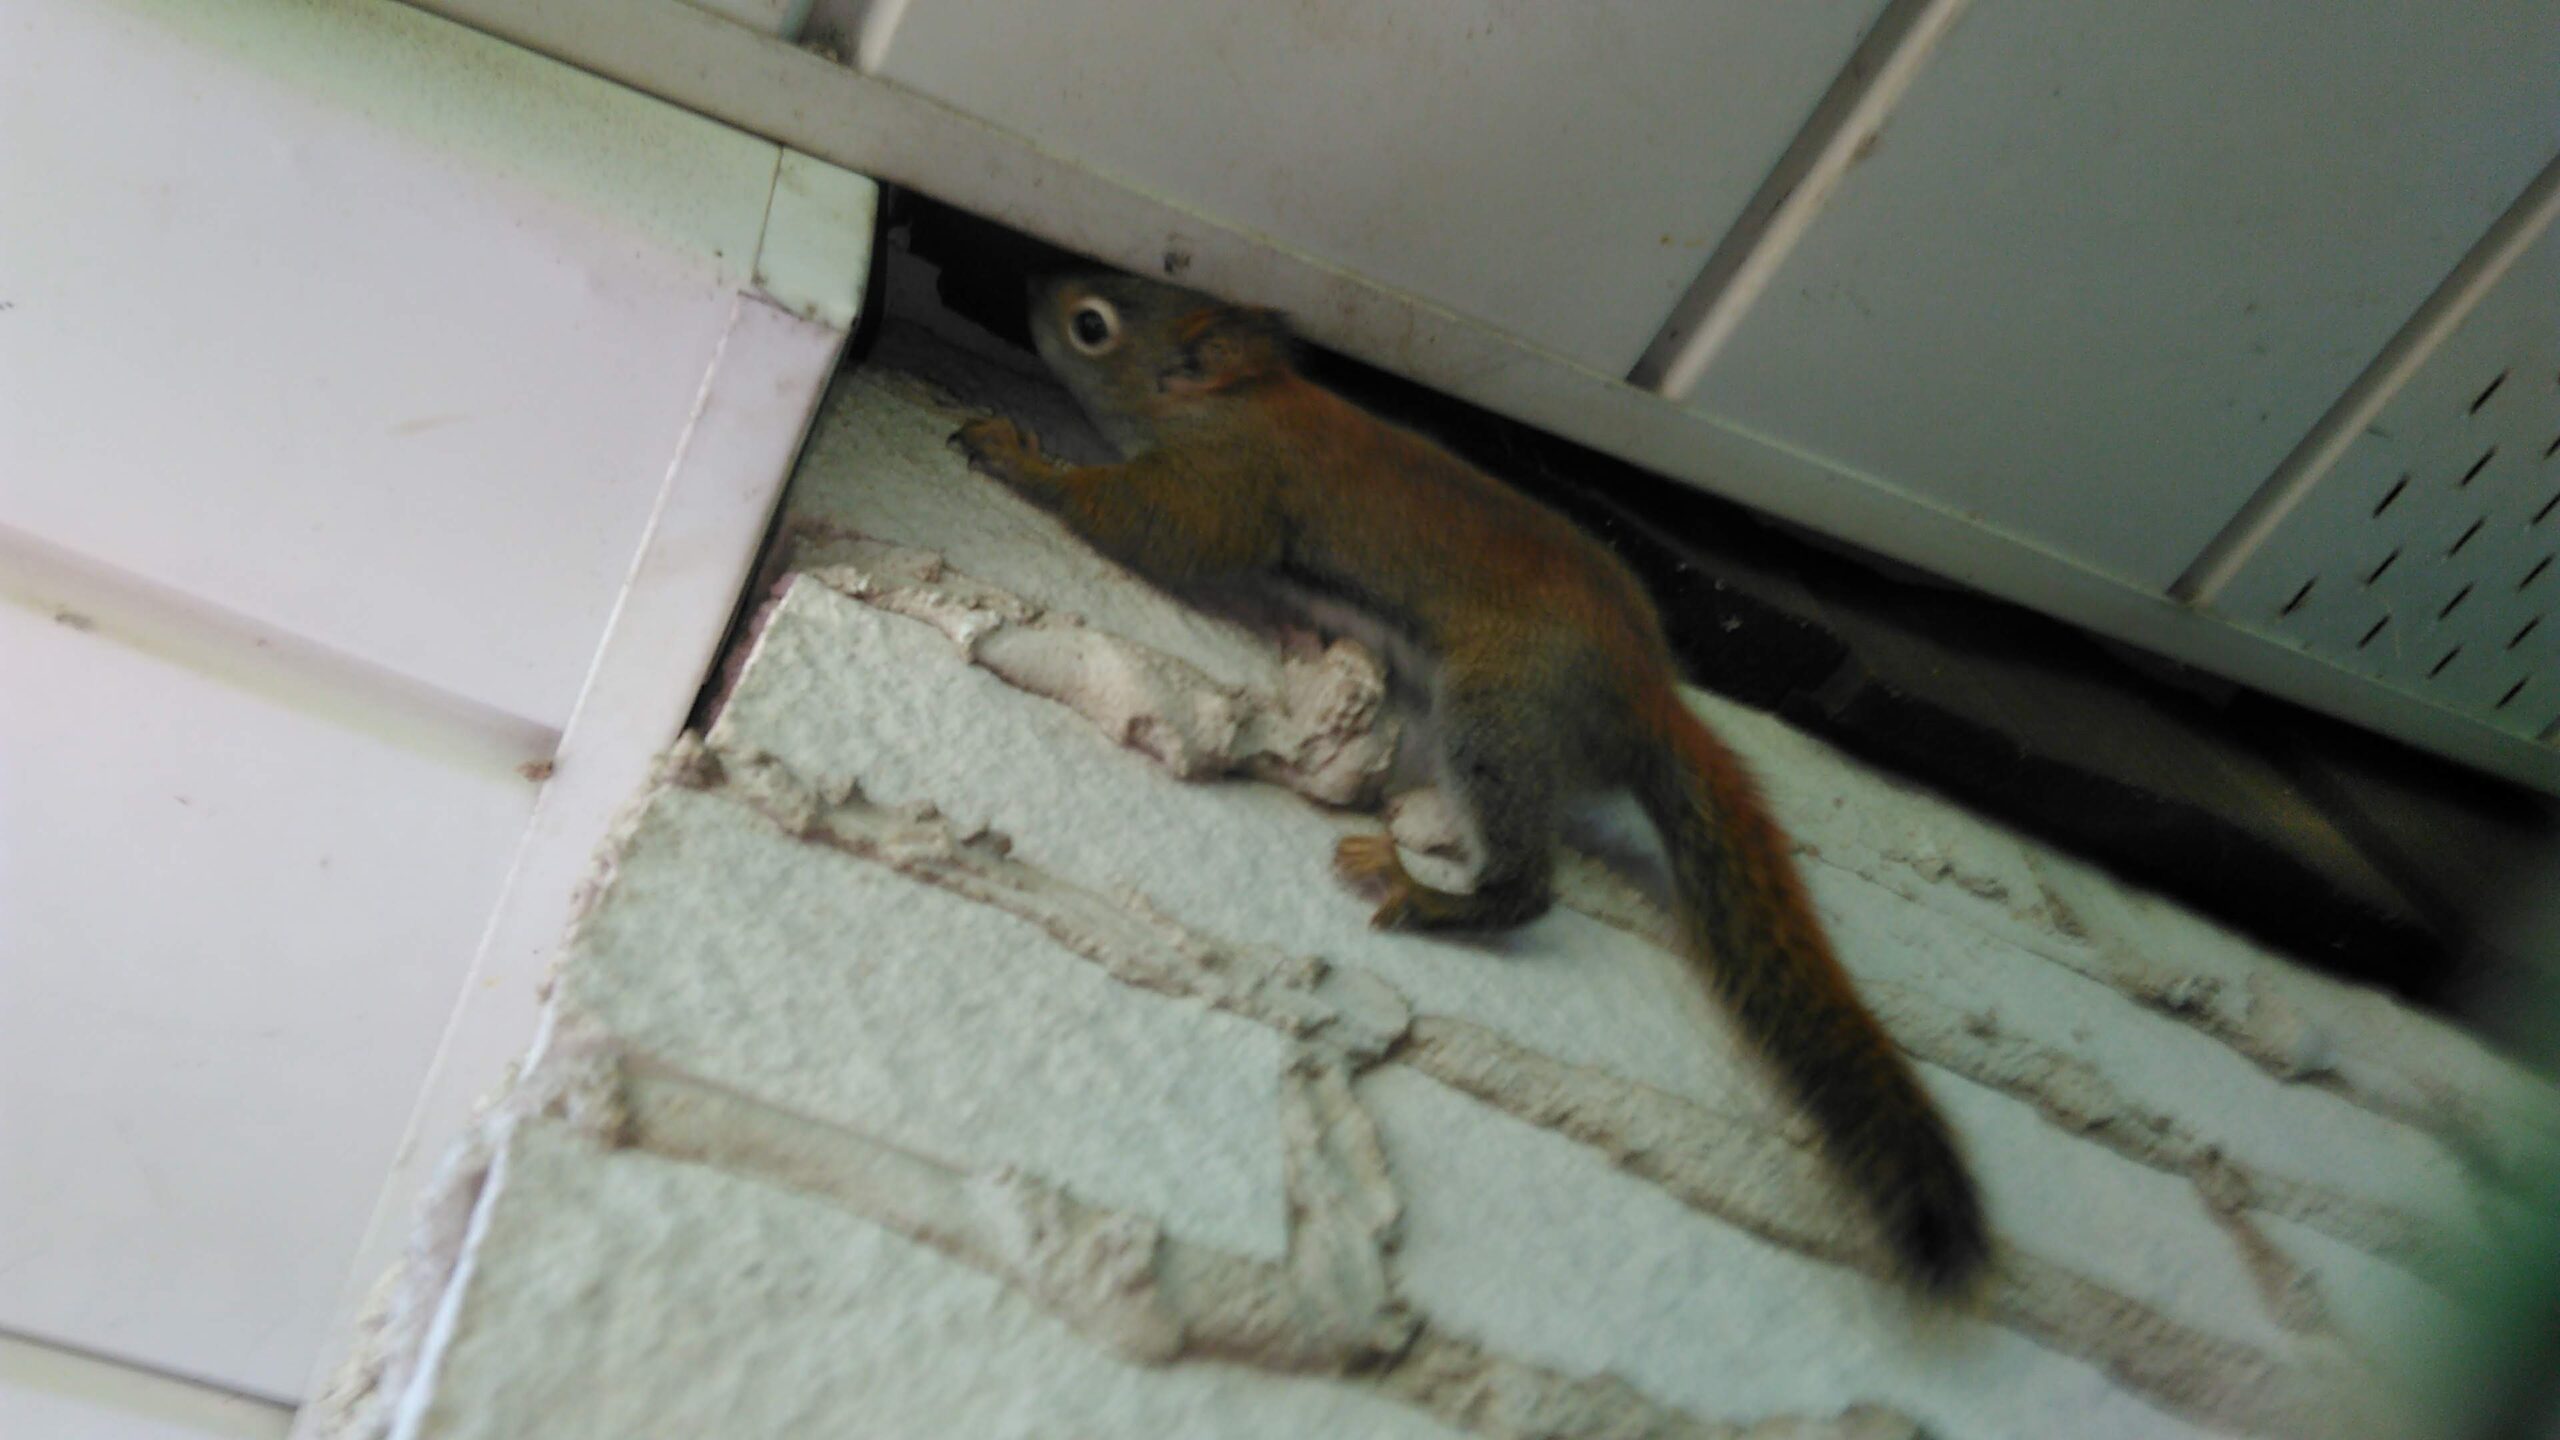 How to get squirrels out from inbetween walls of my house, humanely? After  patching one hole they've created another. How can I get them out and  prevent them from creating more holes